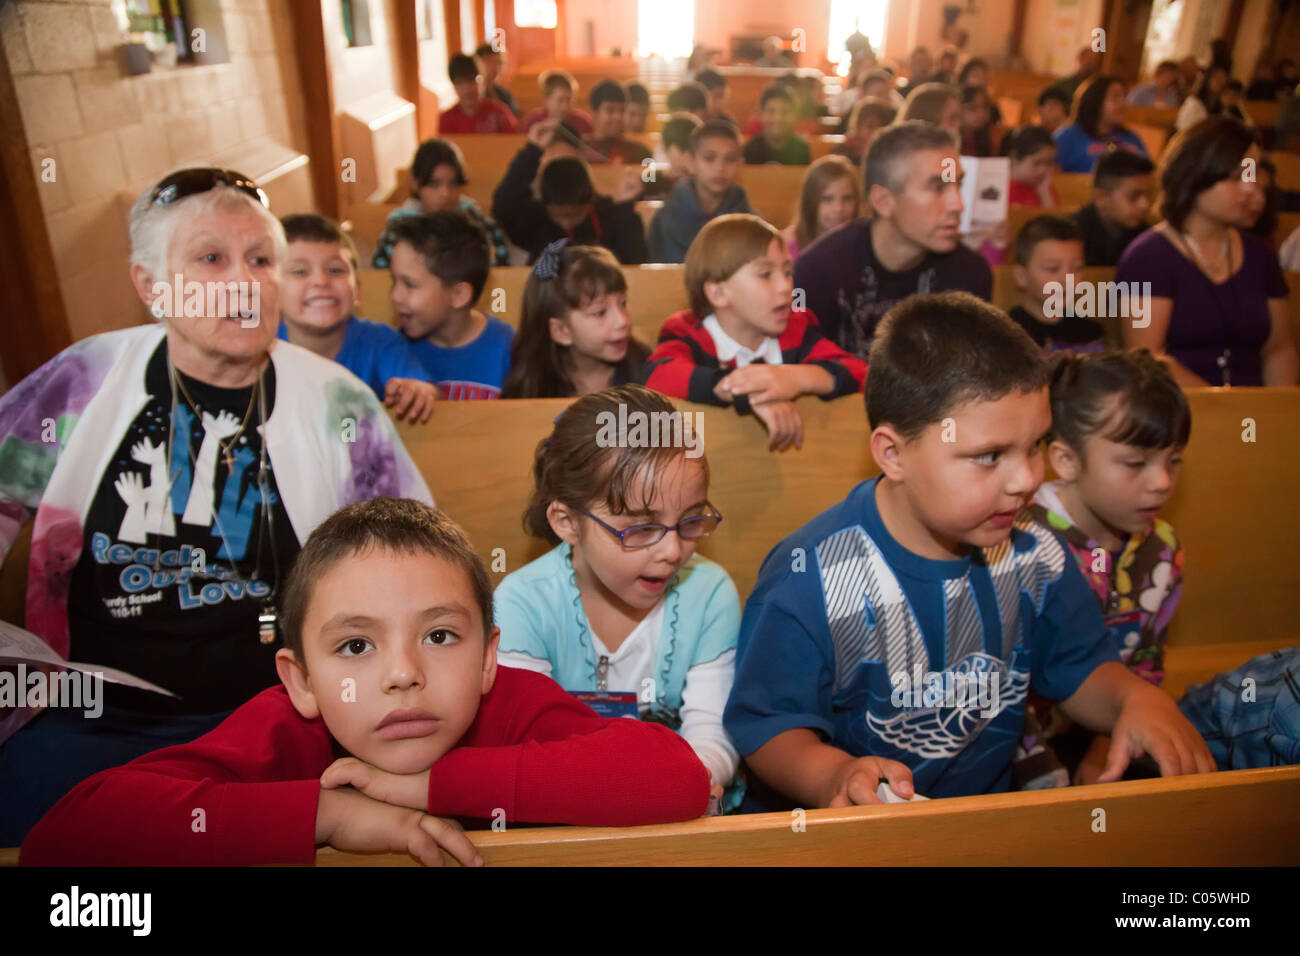 Children at Chapel Service at Methodist-Supported Private School Stock Photo